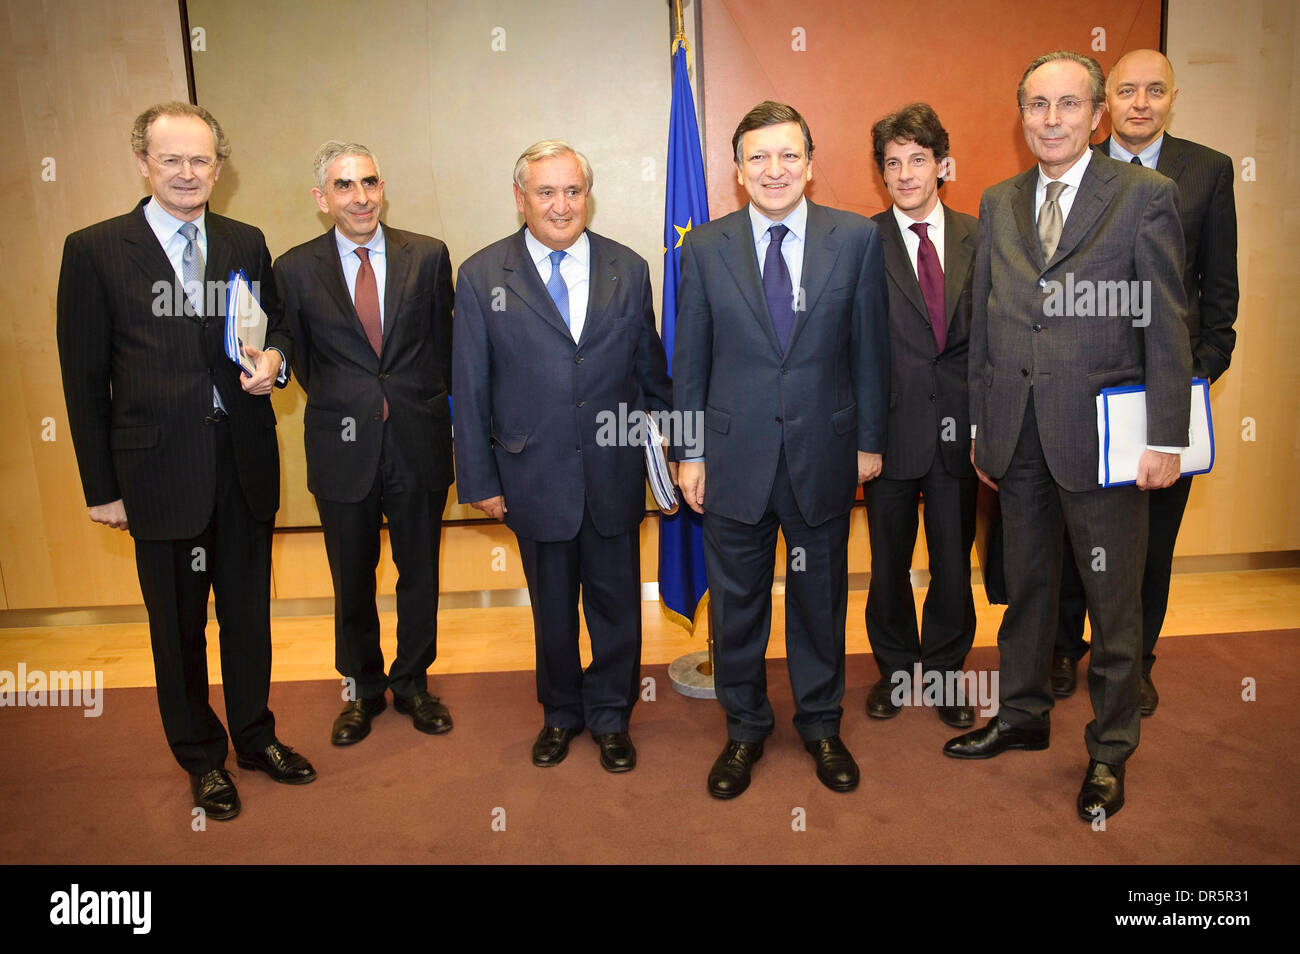 Former French Prime Minister JEAN-PIERRE RAFFARIN (3L) and European Commission President JOSE MANUEL BARROSO (4L) before their meeting at the EU Commission headquarter in  Brussels, Belgium on 2009-03-12. Stock Photo